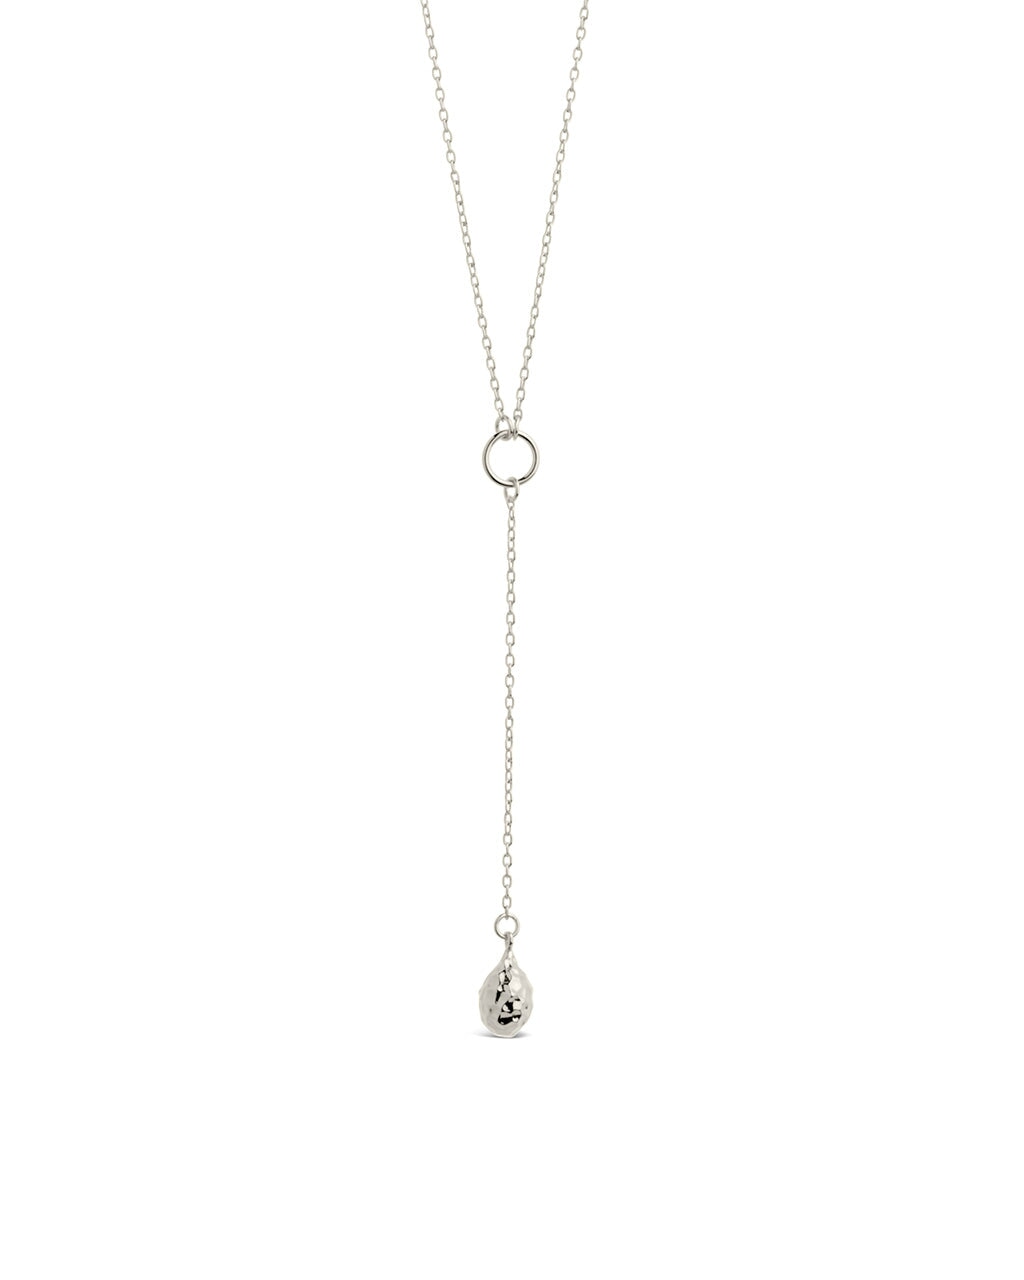 Lee Lariat Necklace Necklace Sterling Forever Silver 